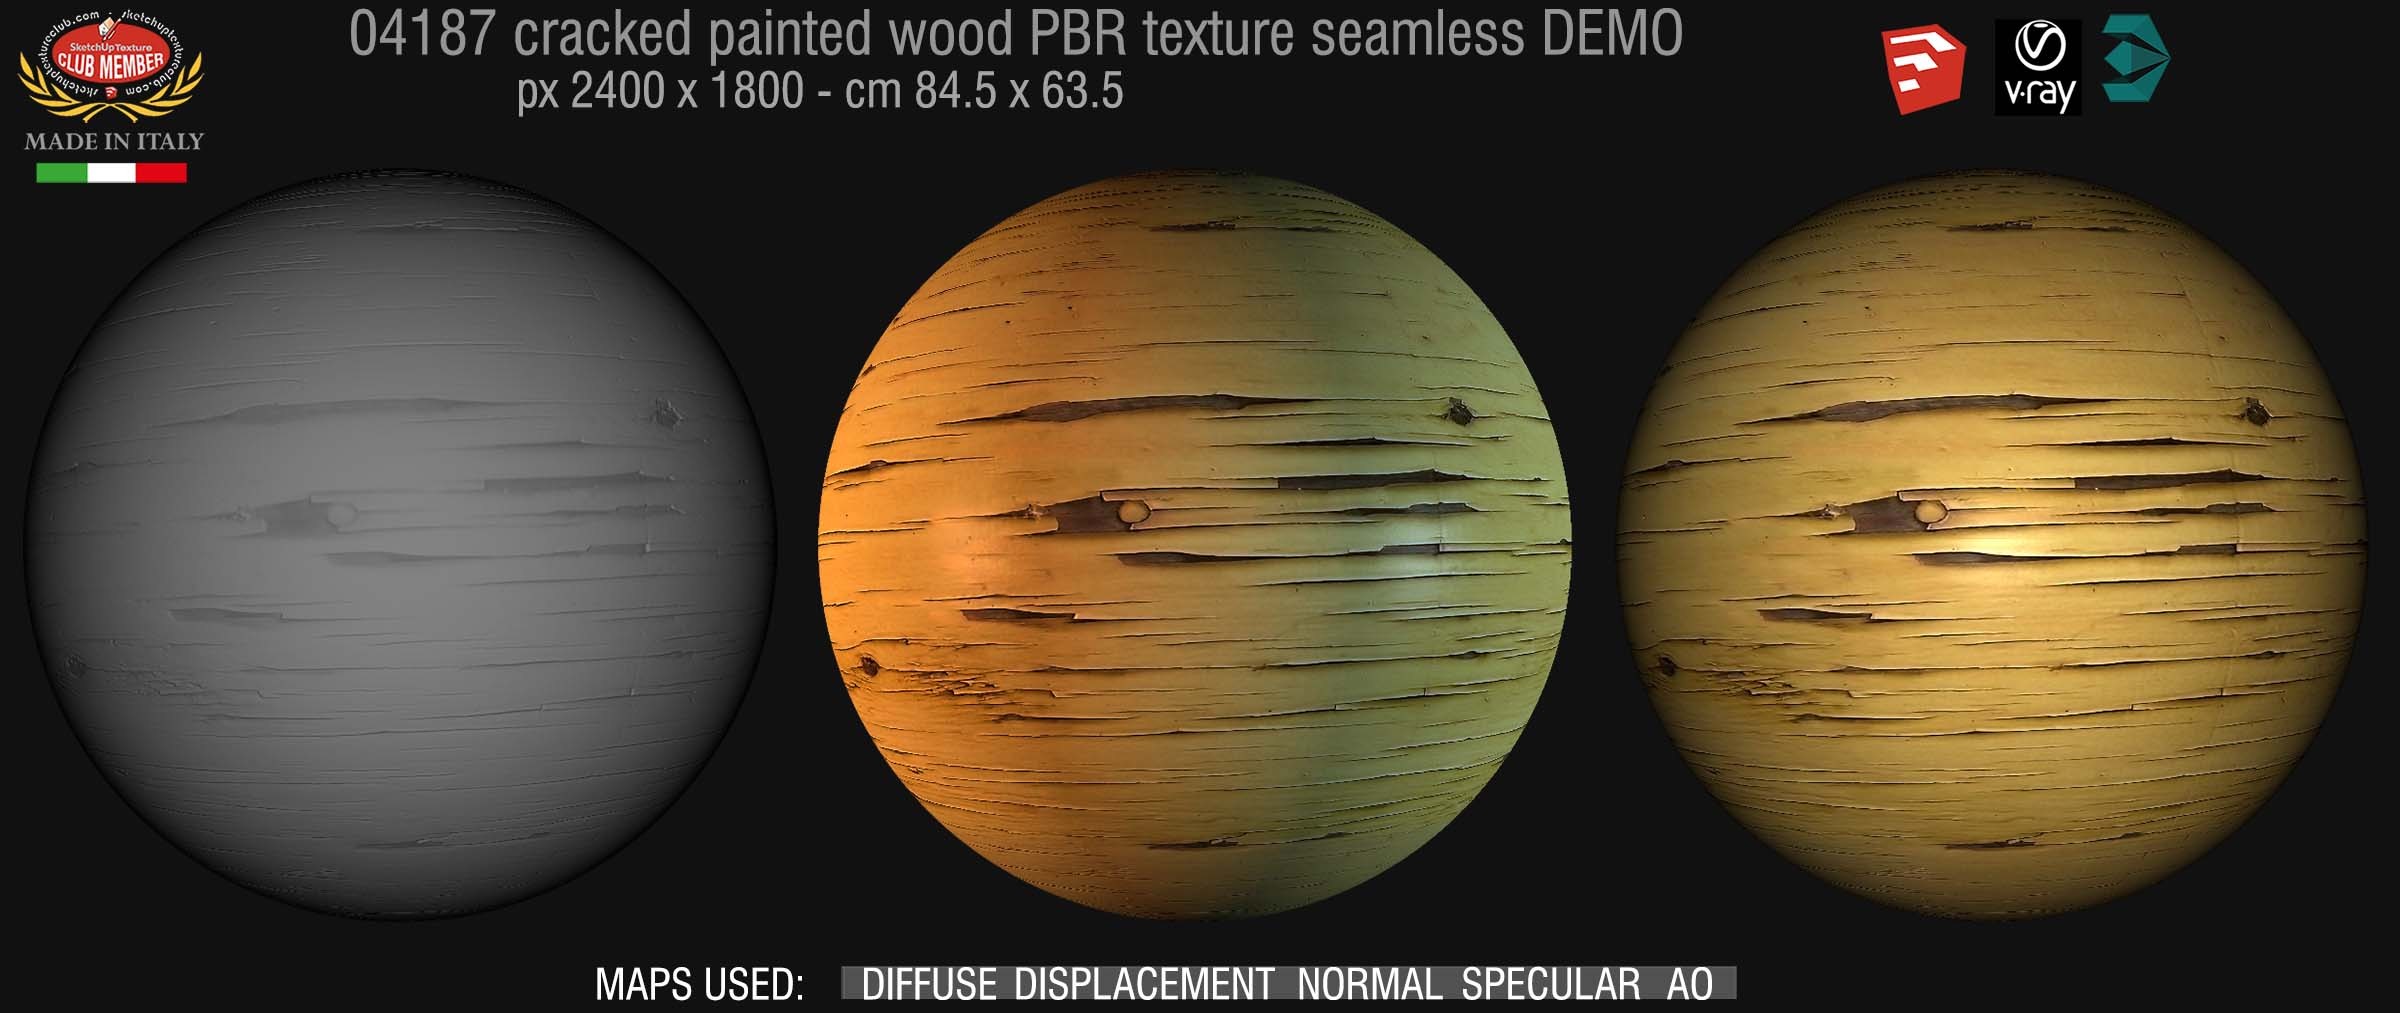 04187 cracked painted wood PBR texture seamless DEMO